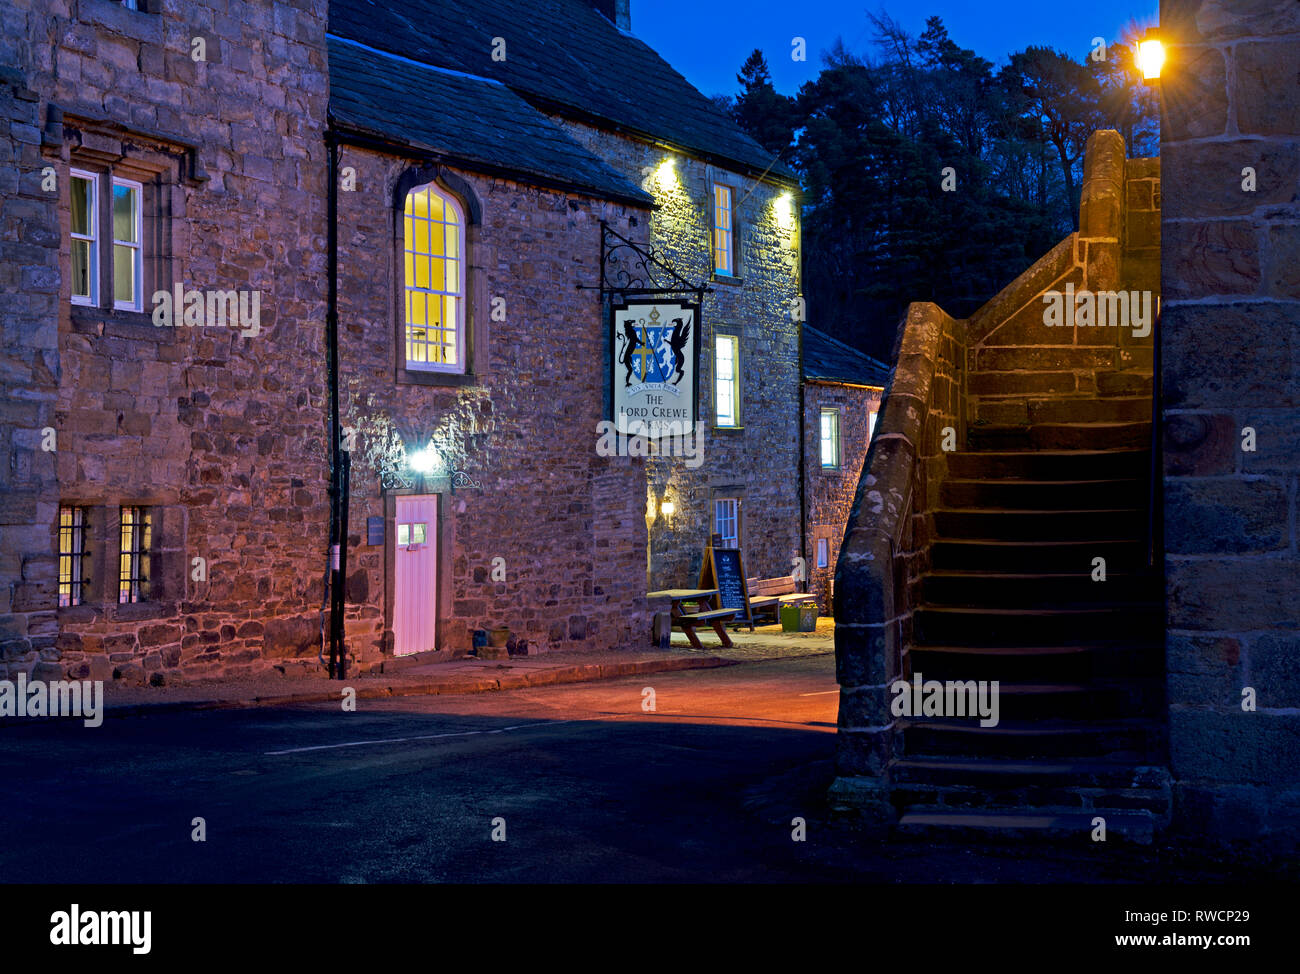 The Lord Crewe Arms at dusk, Blanchland, Northumberland, England UK Stock Photo